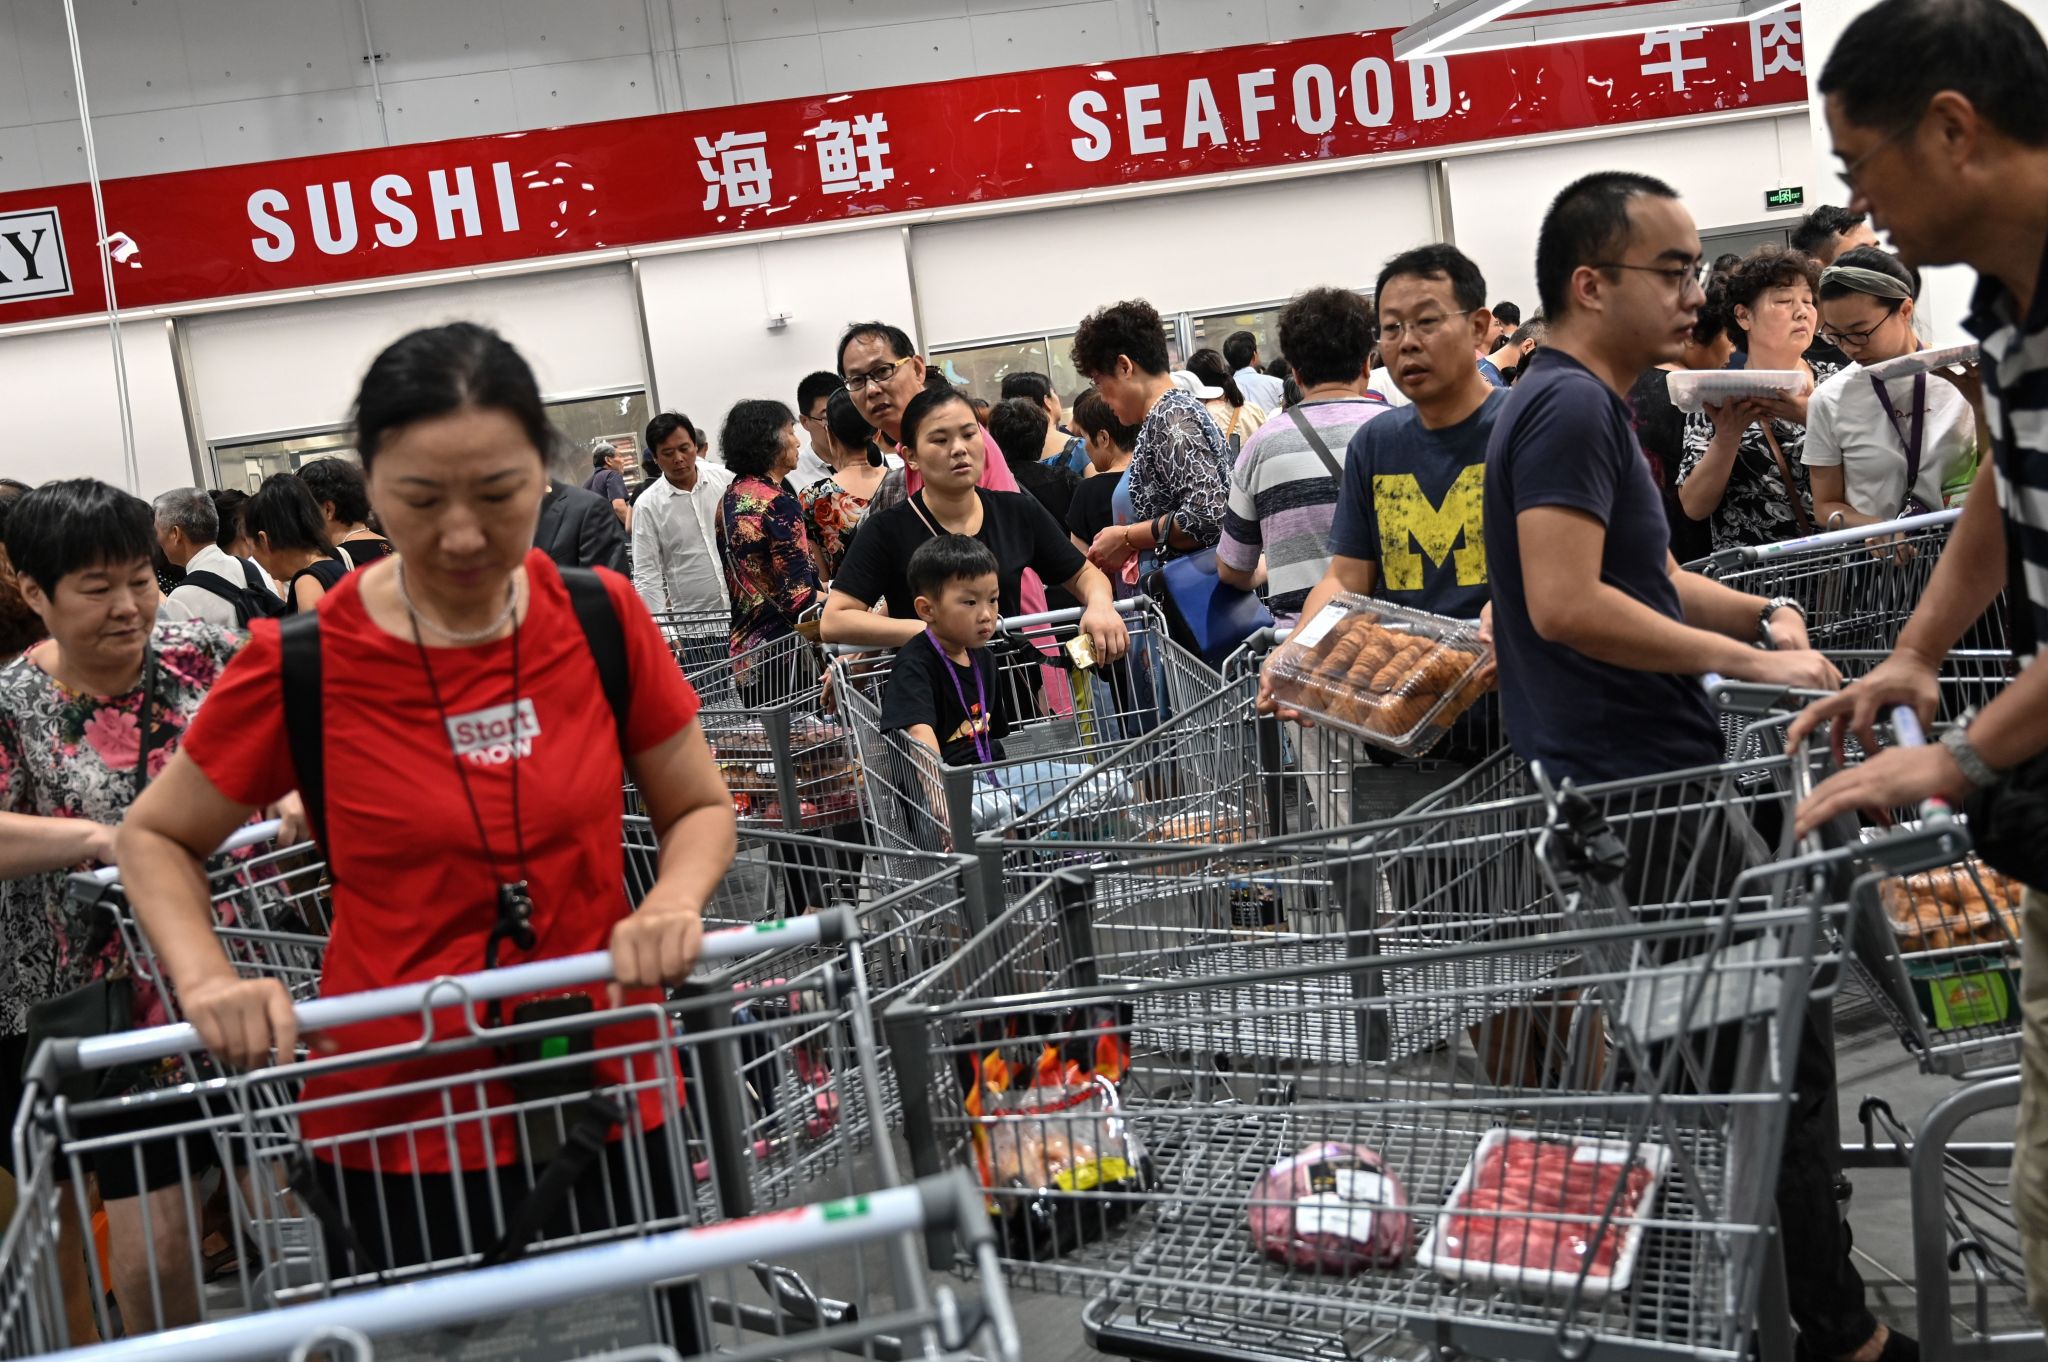 China's first Costco steps up crowd control after chaotic opening day